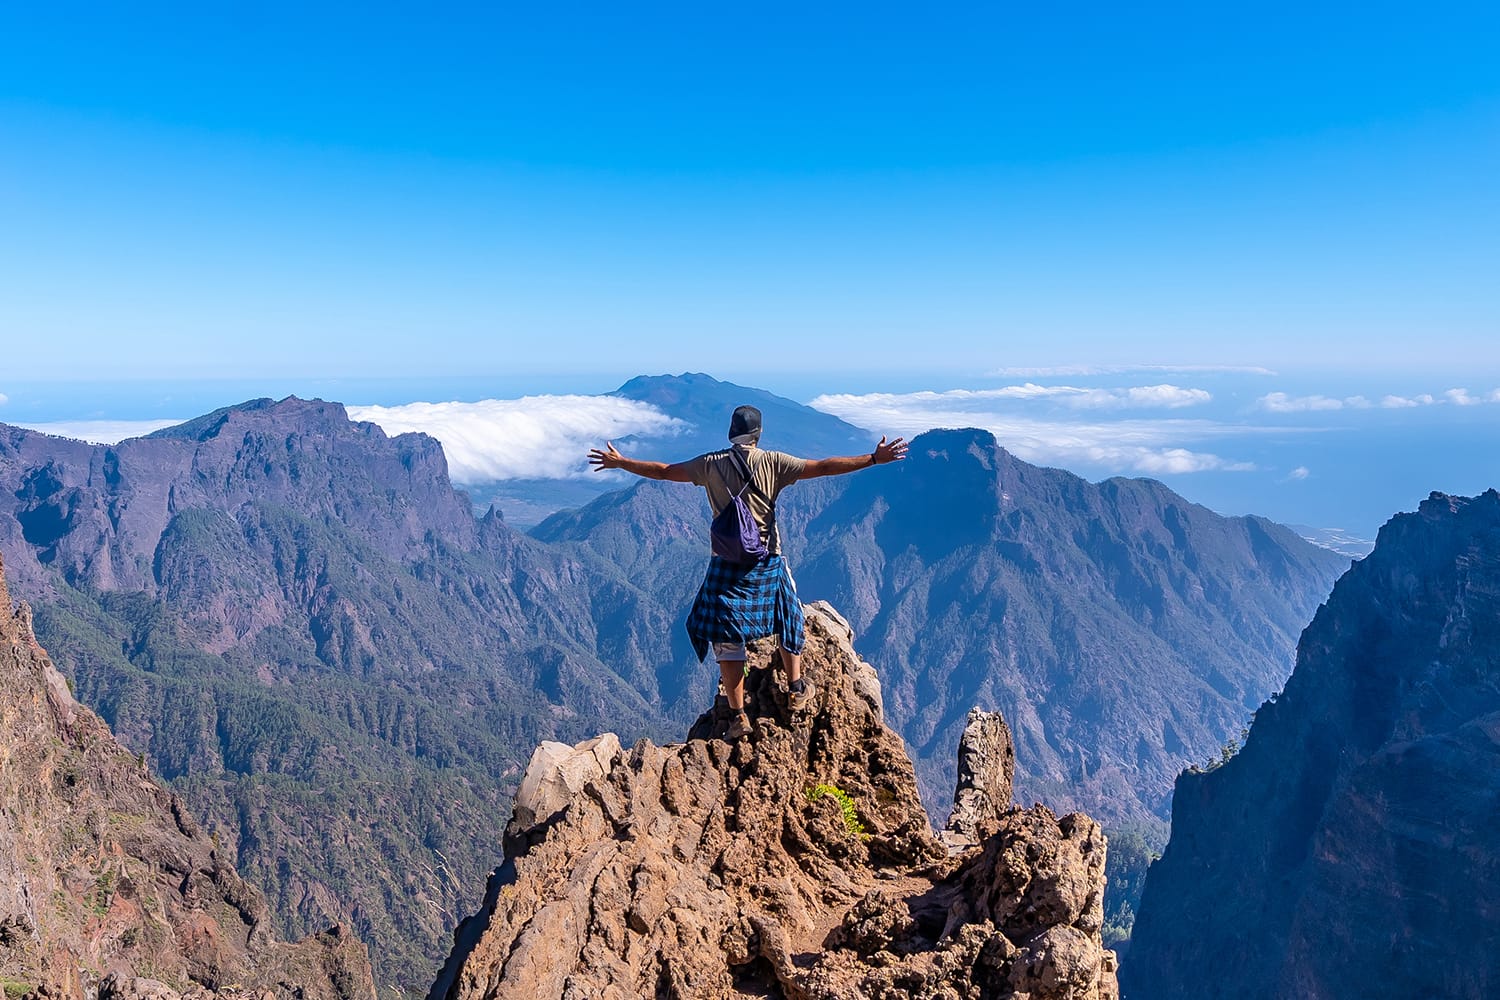 A young man after finishing the trek at the top of the volcano of Caldera de Taburiente near Roque de los Muchachos one summer afternoon, La Palma, Canary Islands. Spain